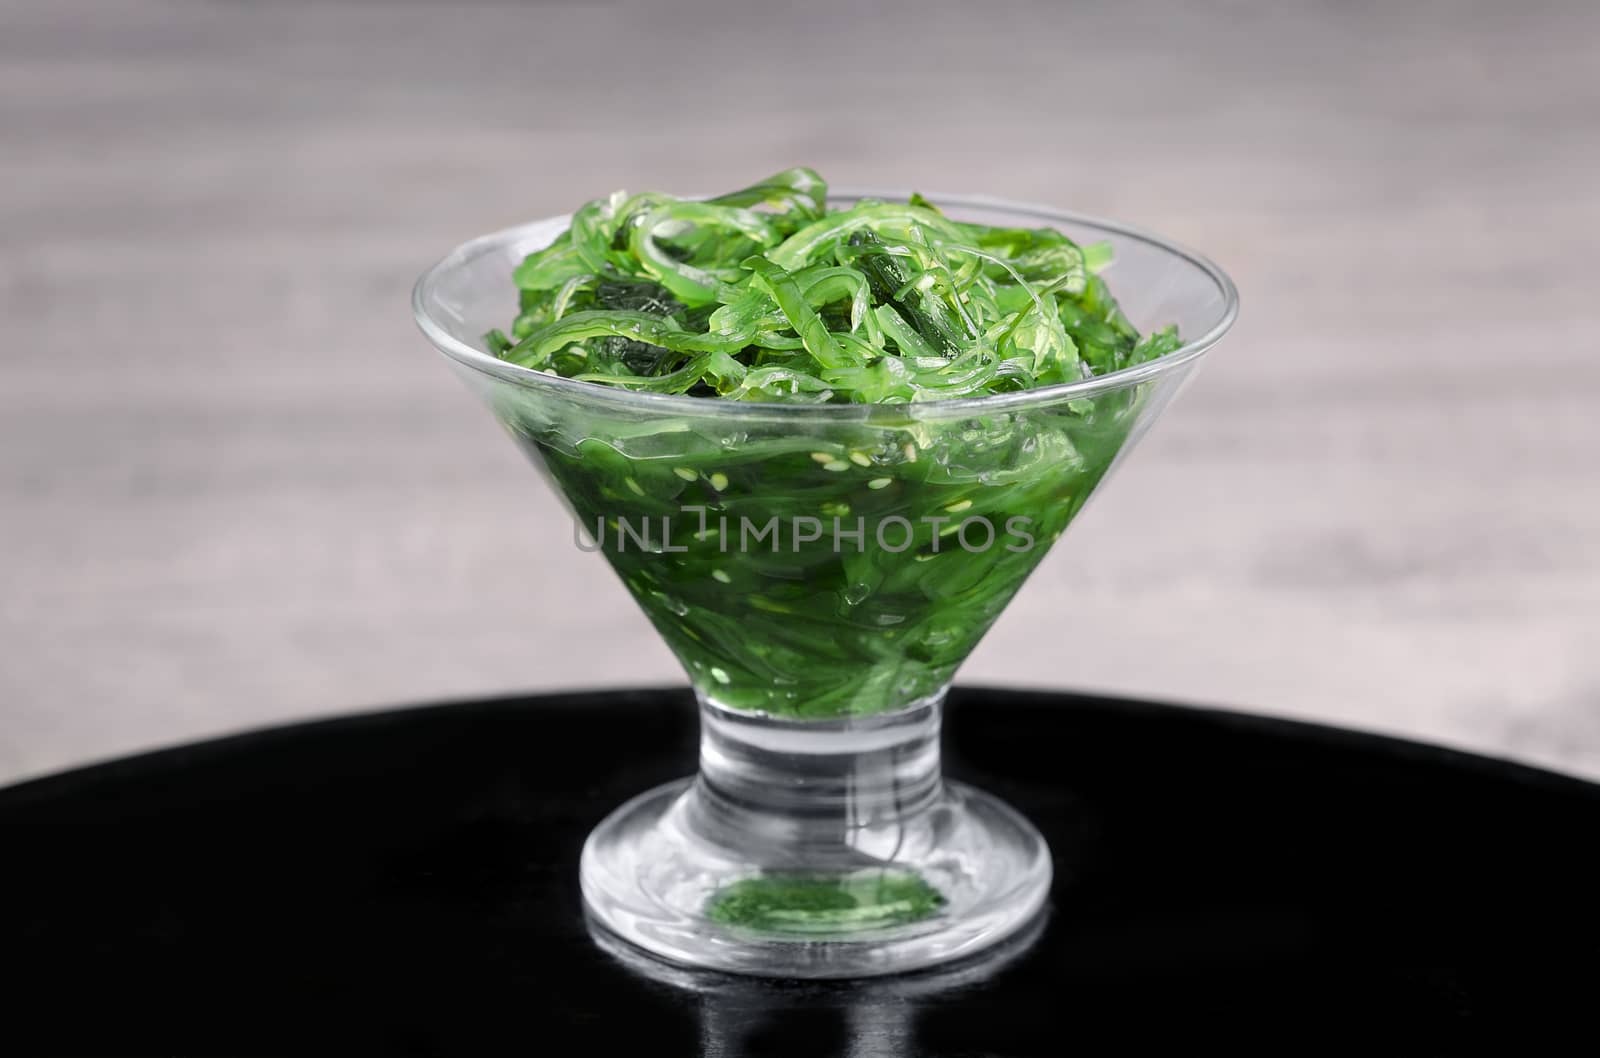 Seaweed in a glass vase by Gaina